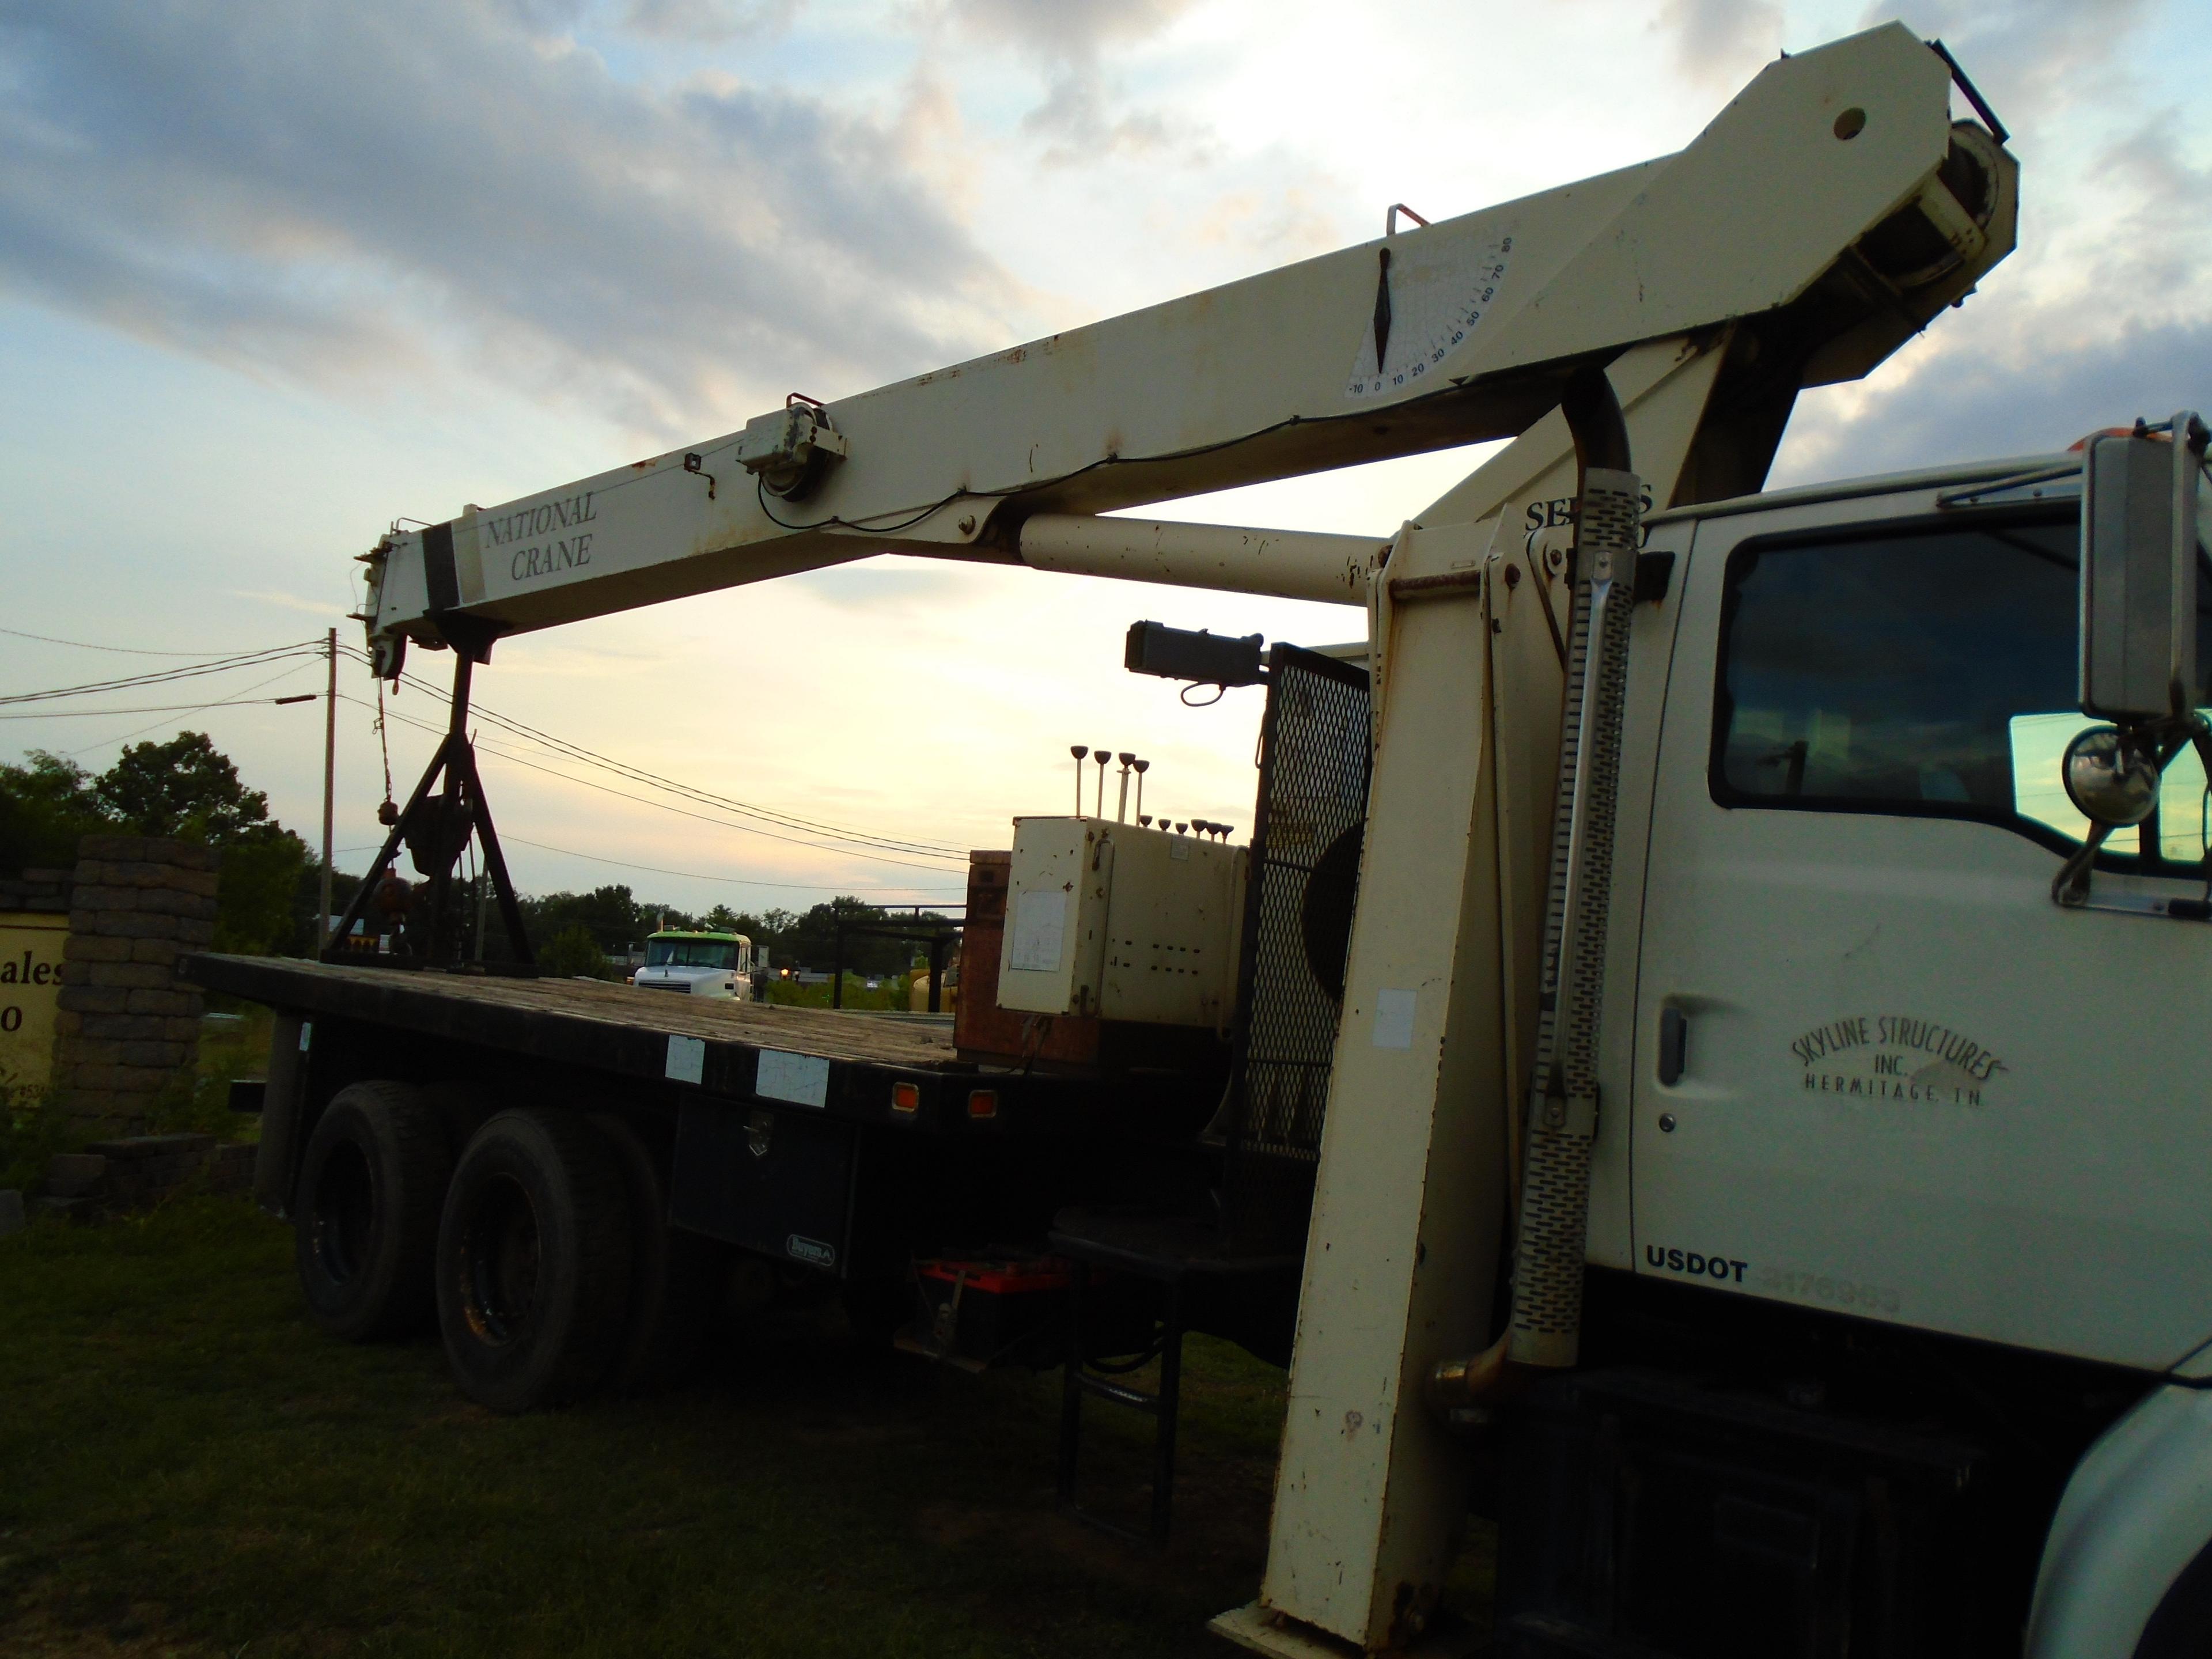 1998 Ford 9000 with National Crane Series 1100 Crane